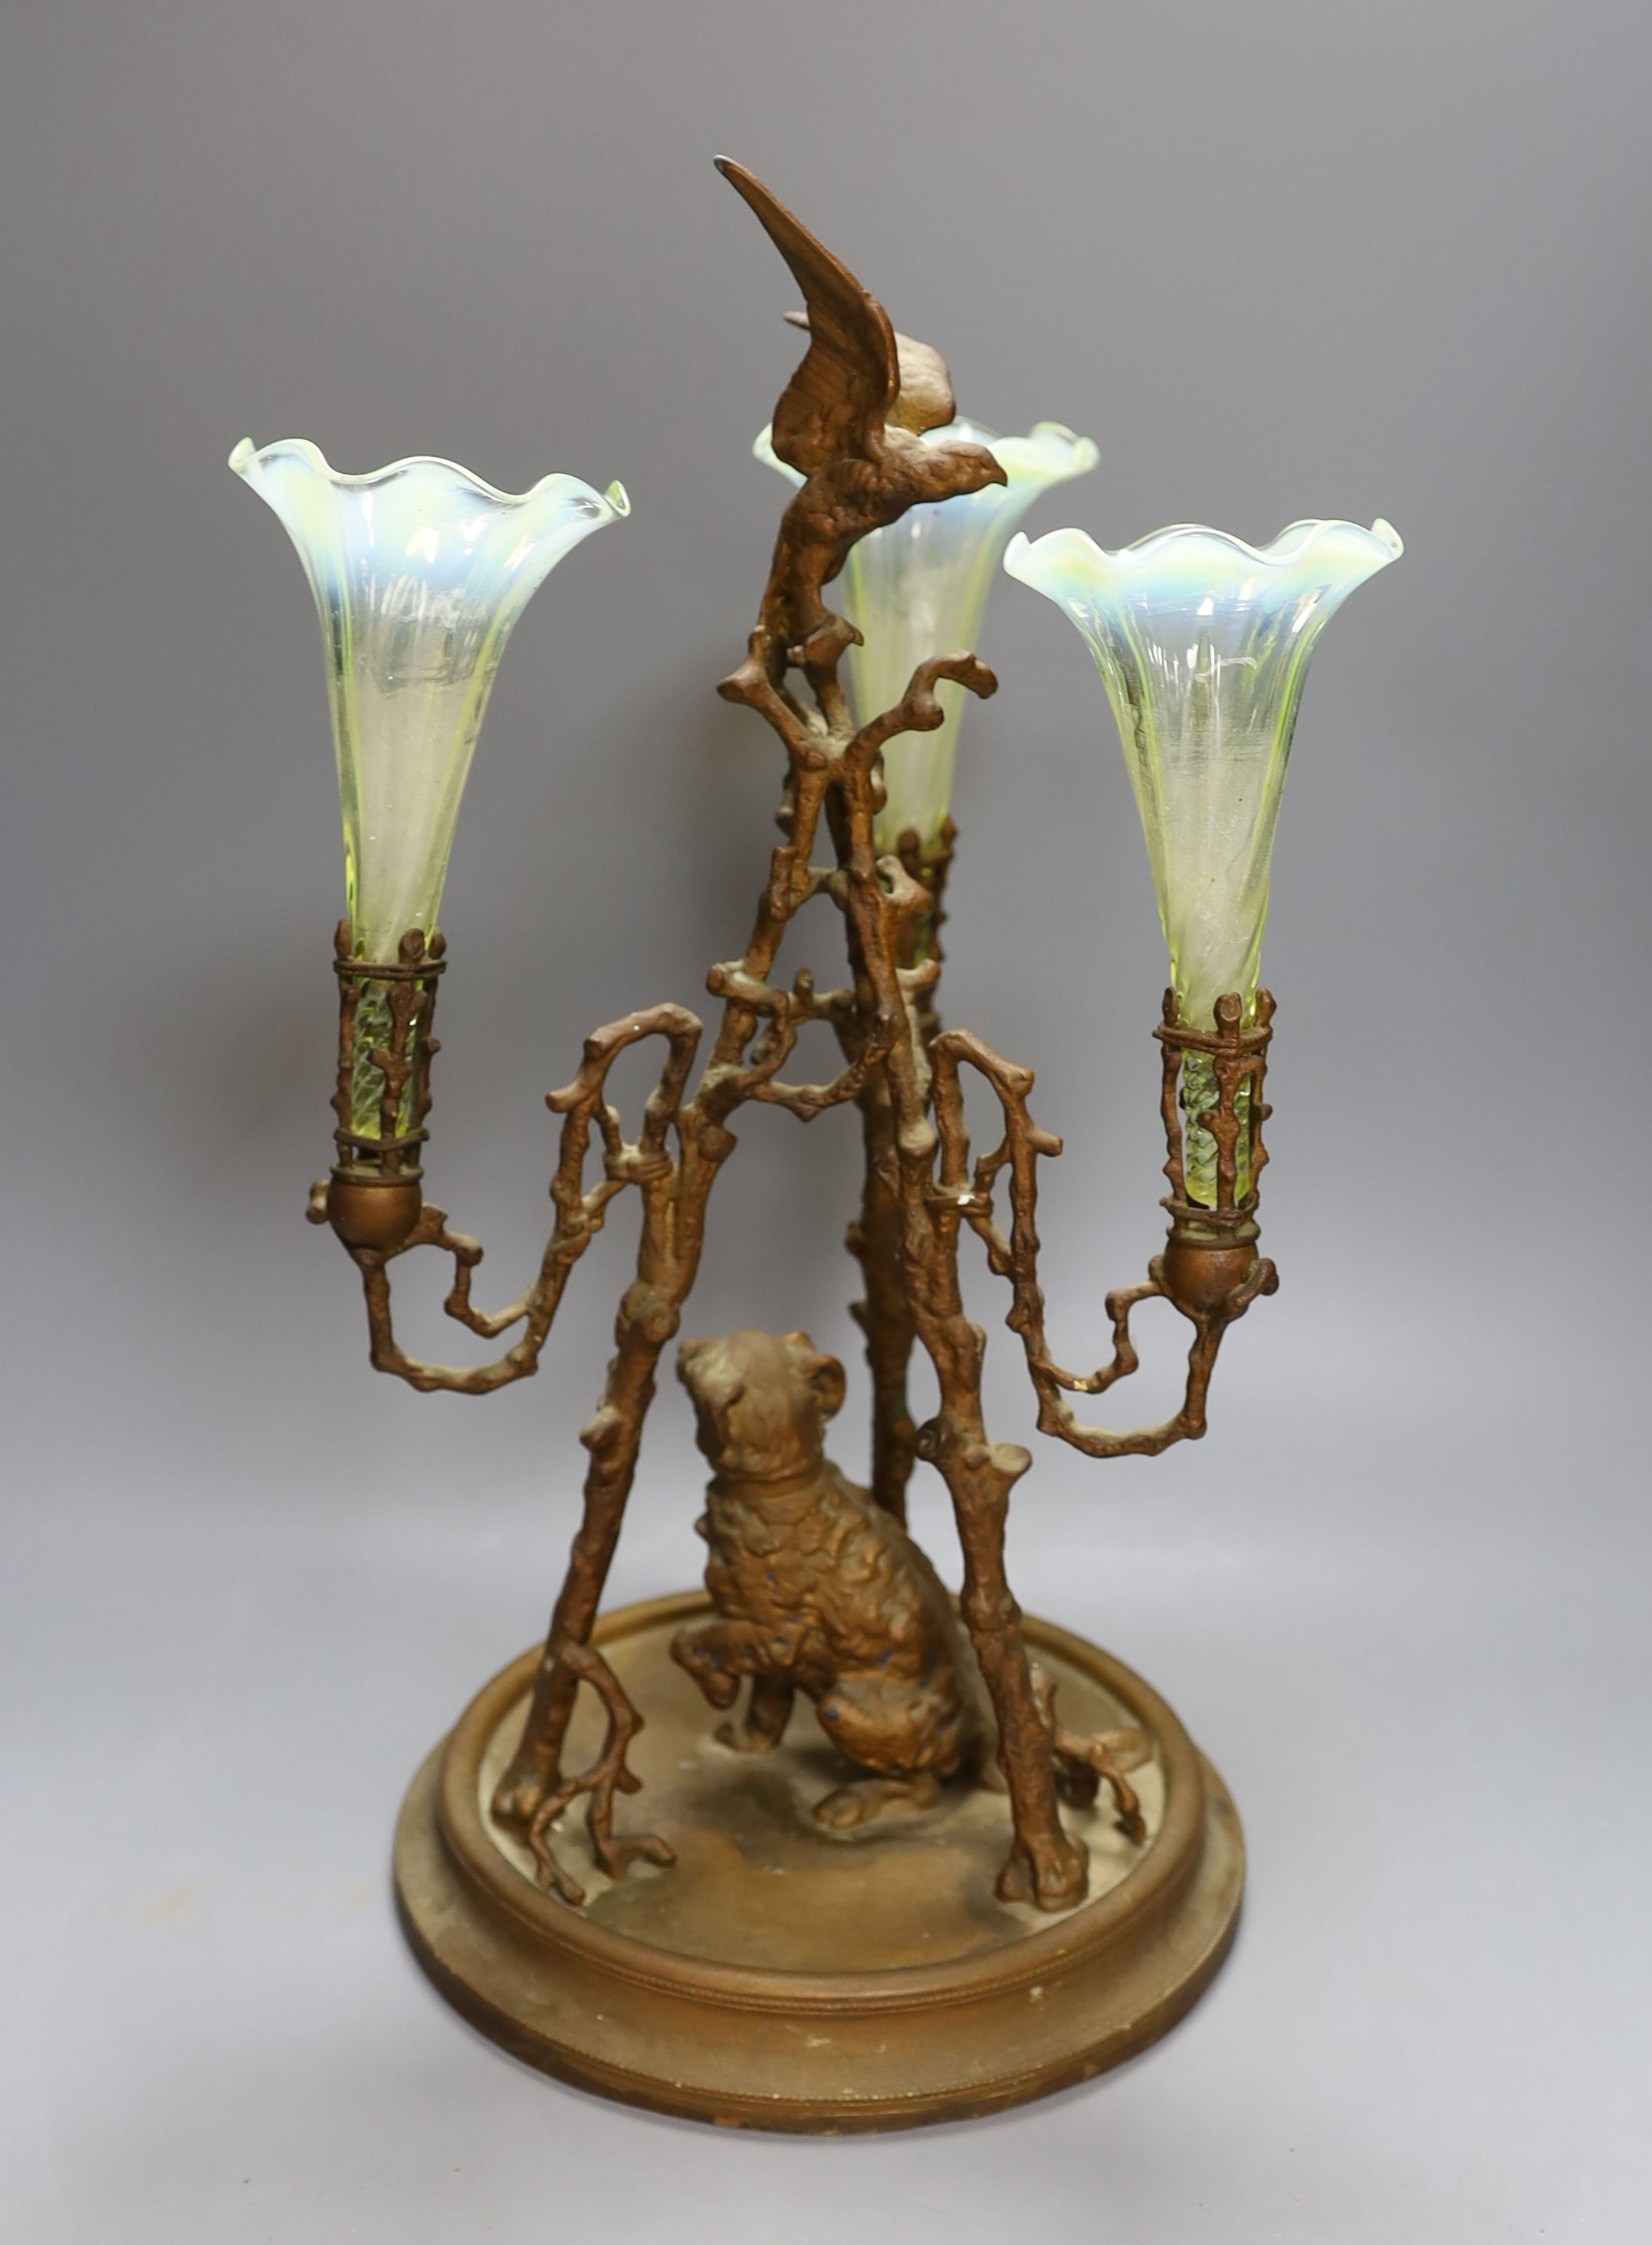 A 19th century 3 branch and spelter epergne decorated with a dog and bird - 41cm tall, with Vaseline glass vases